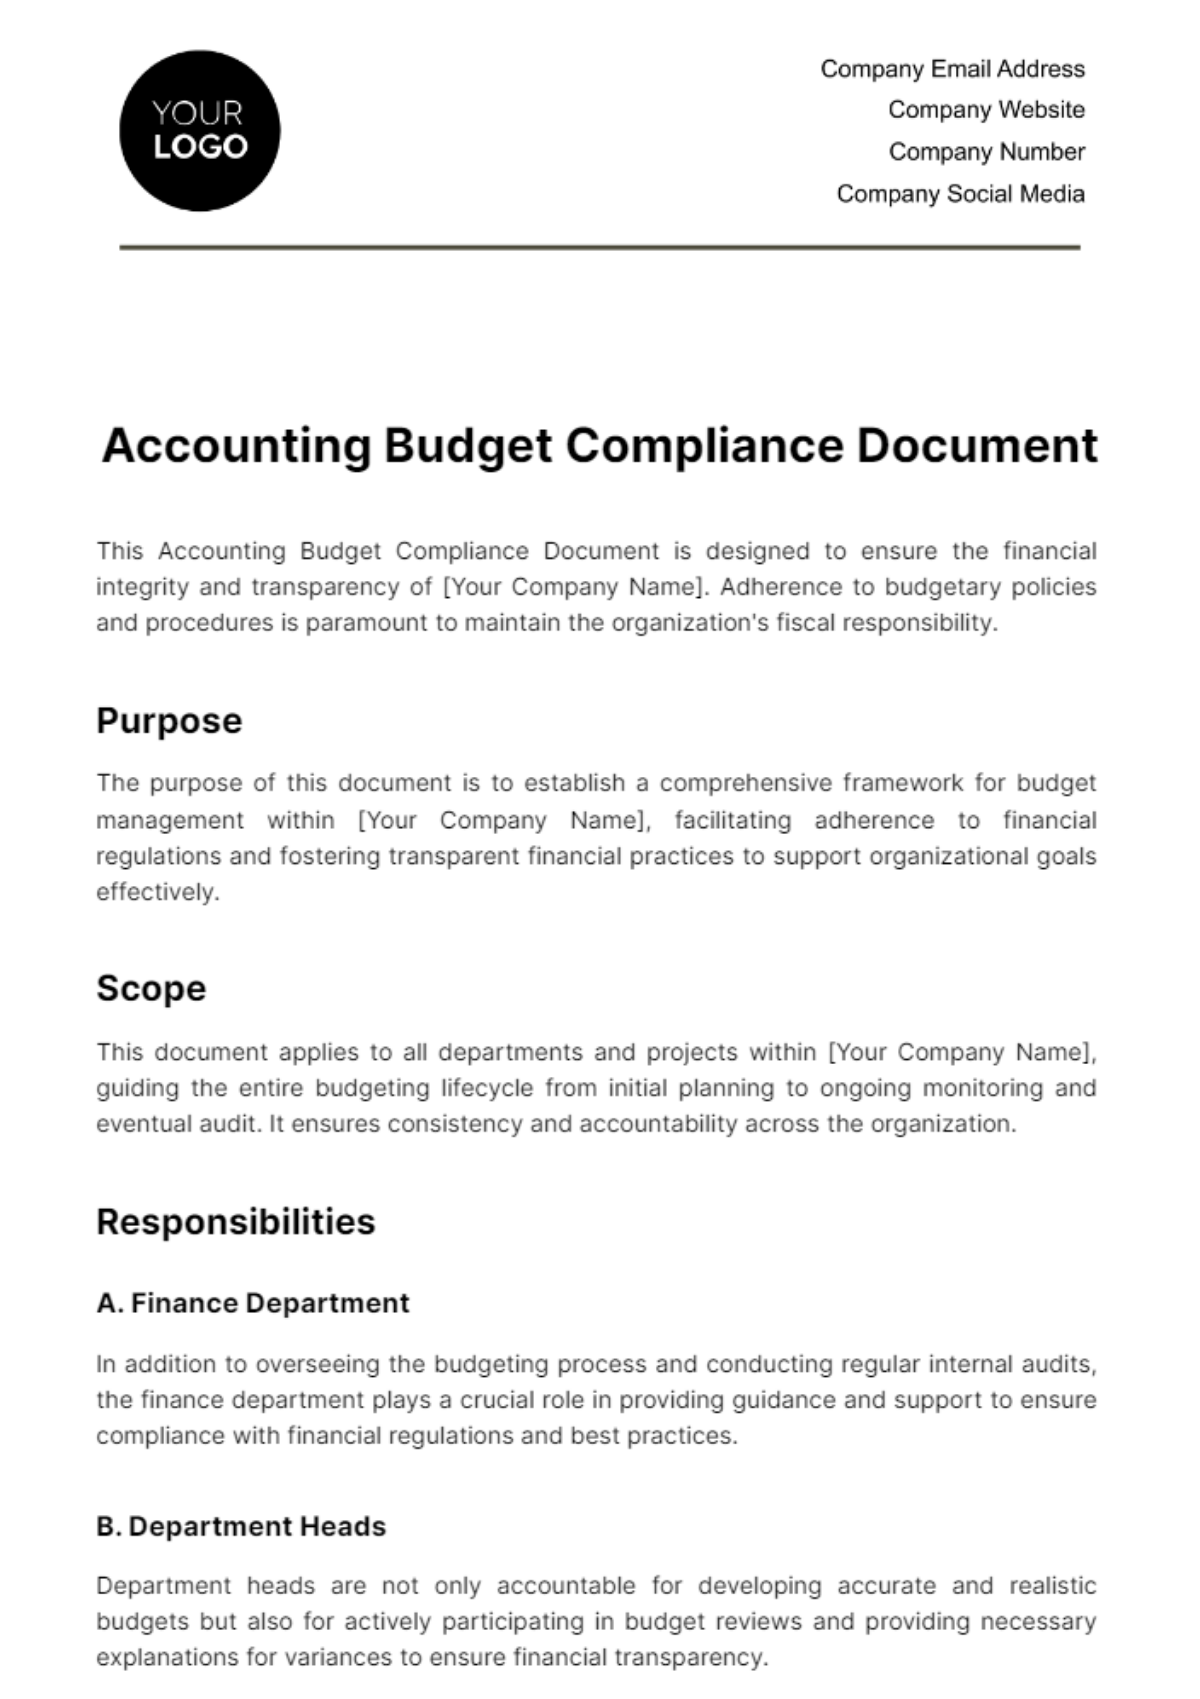 Free Accounting Budget Compliance Document Template